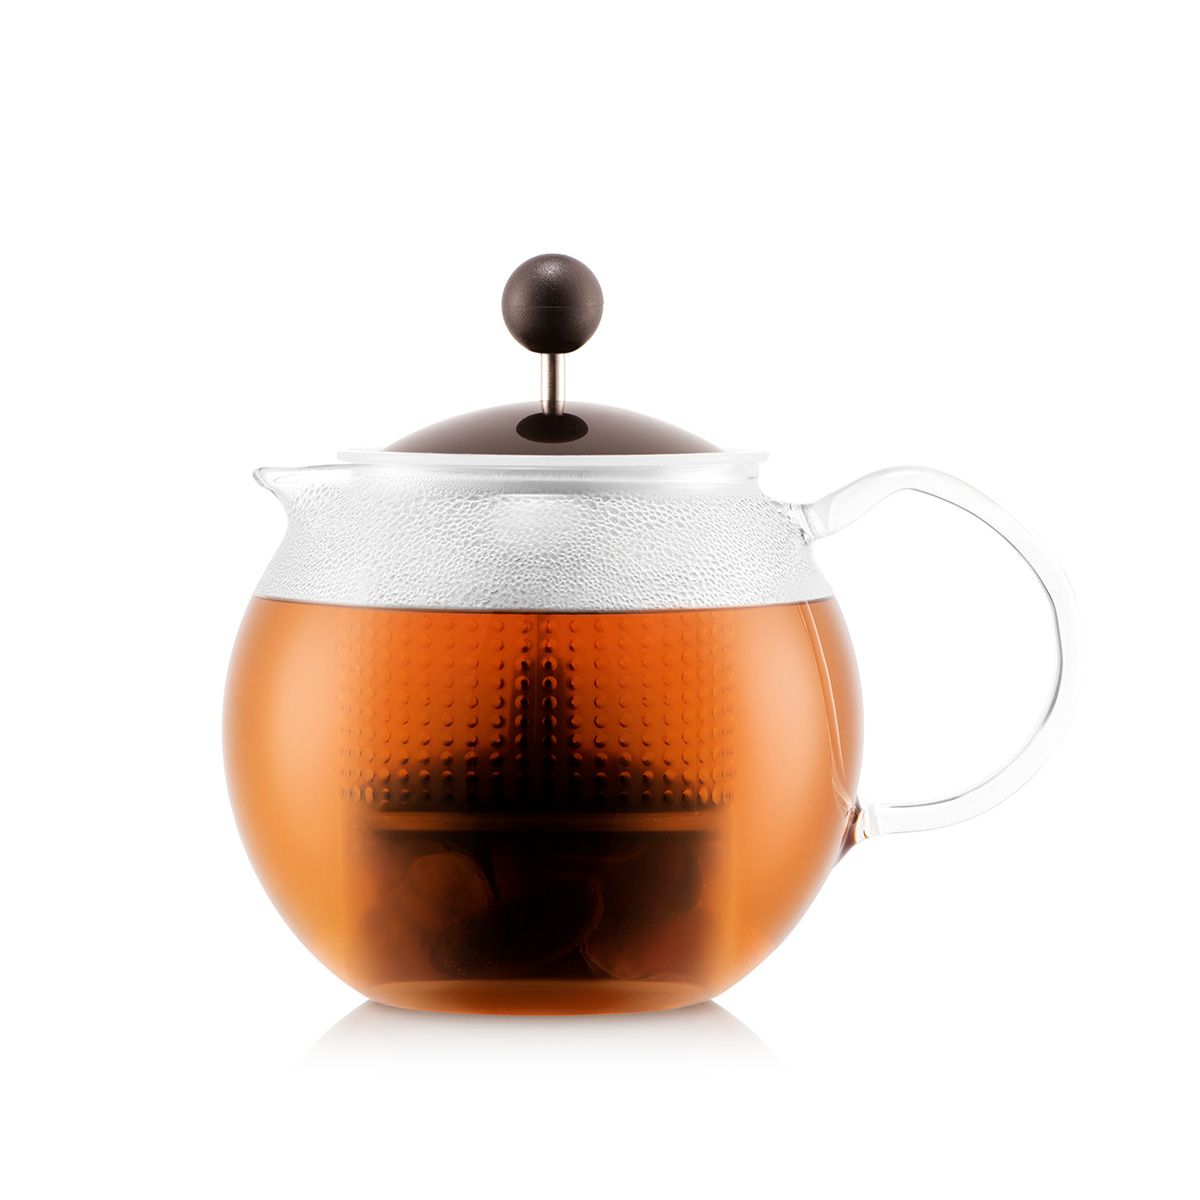 Porcelain Teapot with Stainless Steel Infuser - 17oz